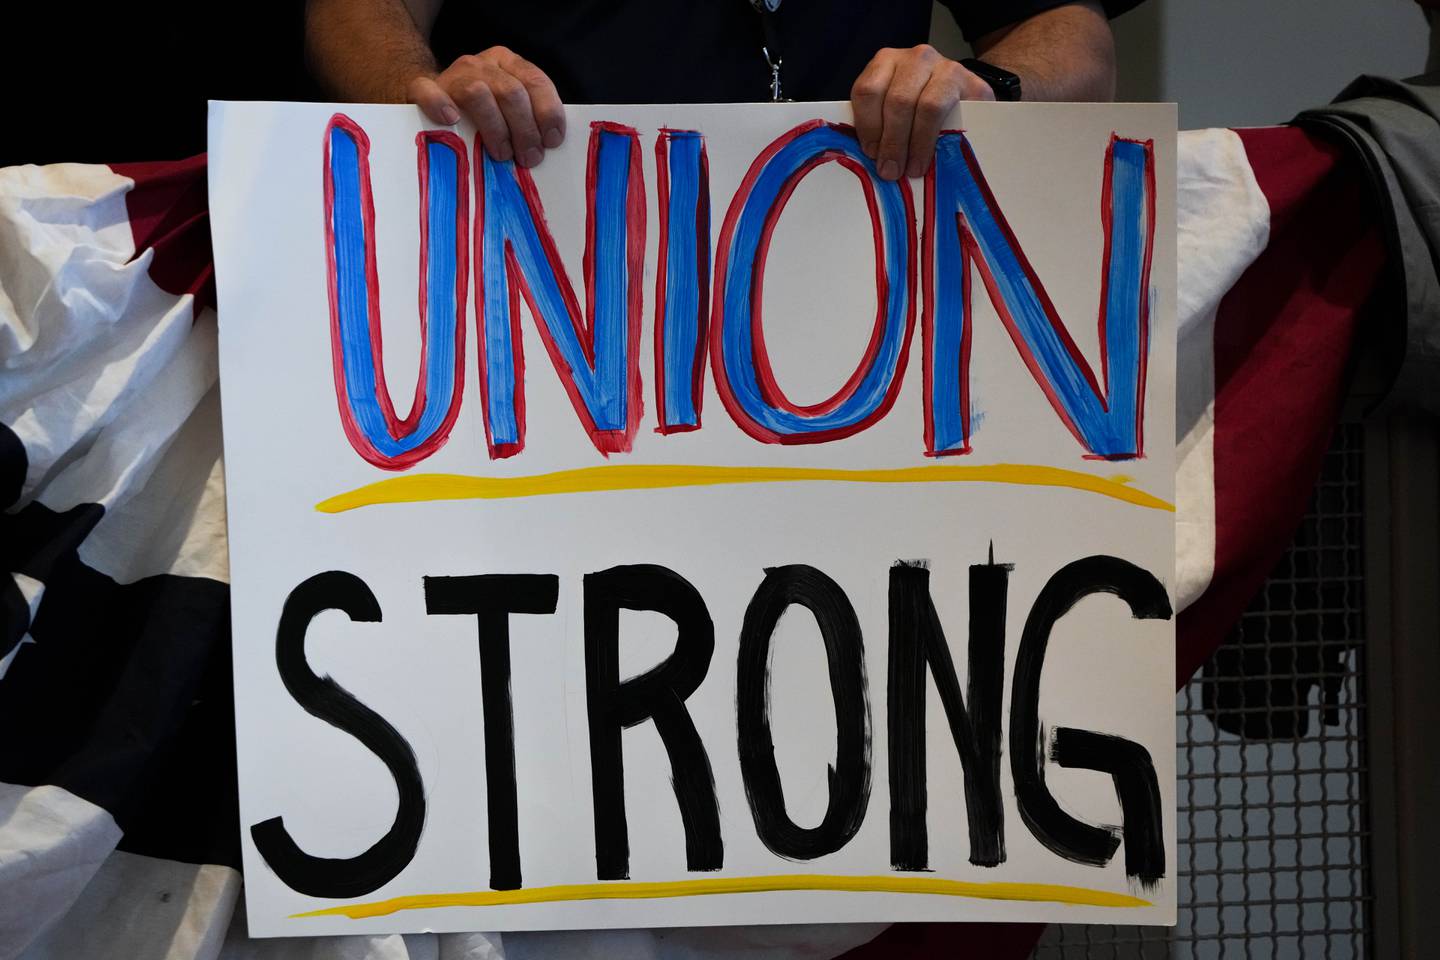 A union member holds a sign reading “Union Strong” during U.S. President Joe Biden’s visit to the IBEW Local 26 union at their office in Lanham, Maryland on 2/15/23.